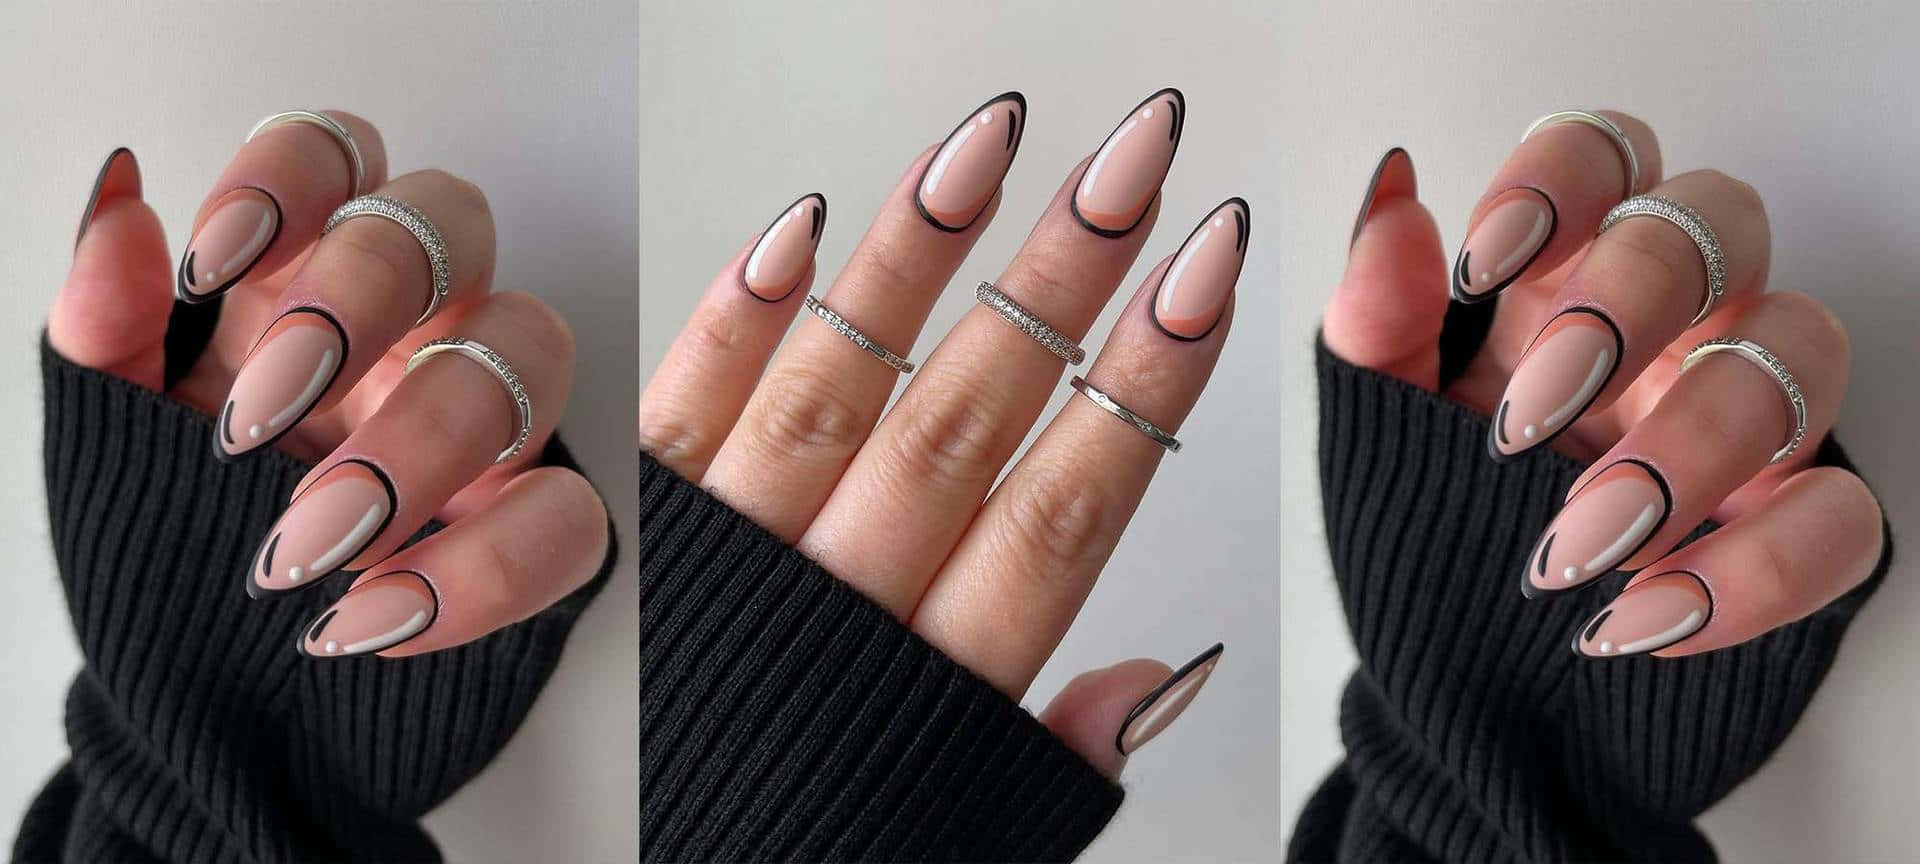 A Woman's Nails Are Shown In Different Angles